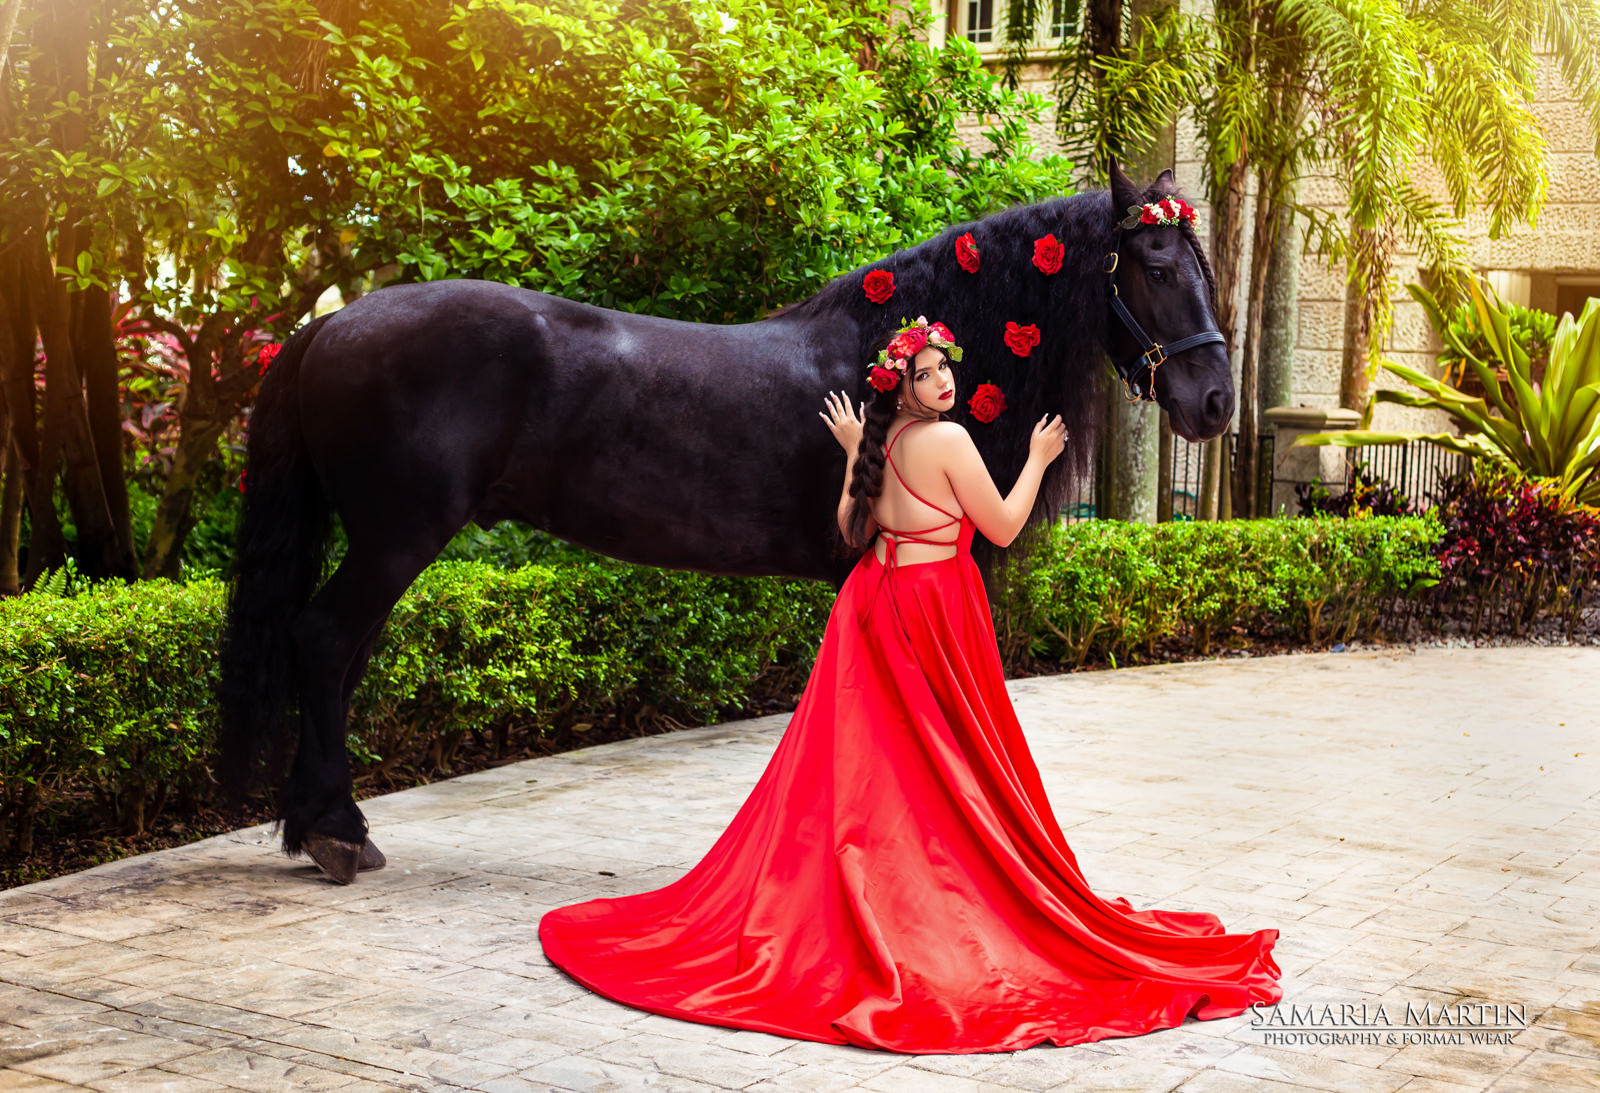 Quinceanera with horse photoshoot, best quinceanera pictures in Miami, Samaria Martin Photographer, where to rent quinceanera dresses, quinceanera collection 1